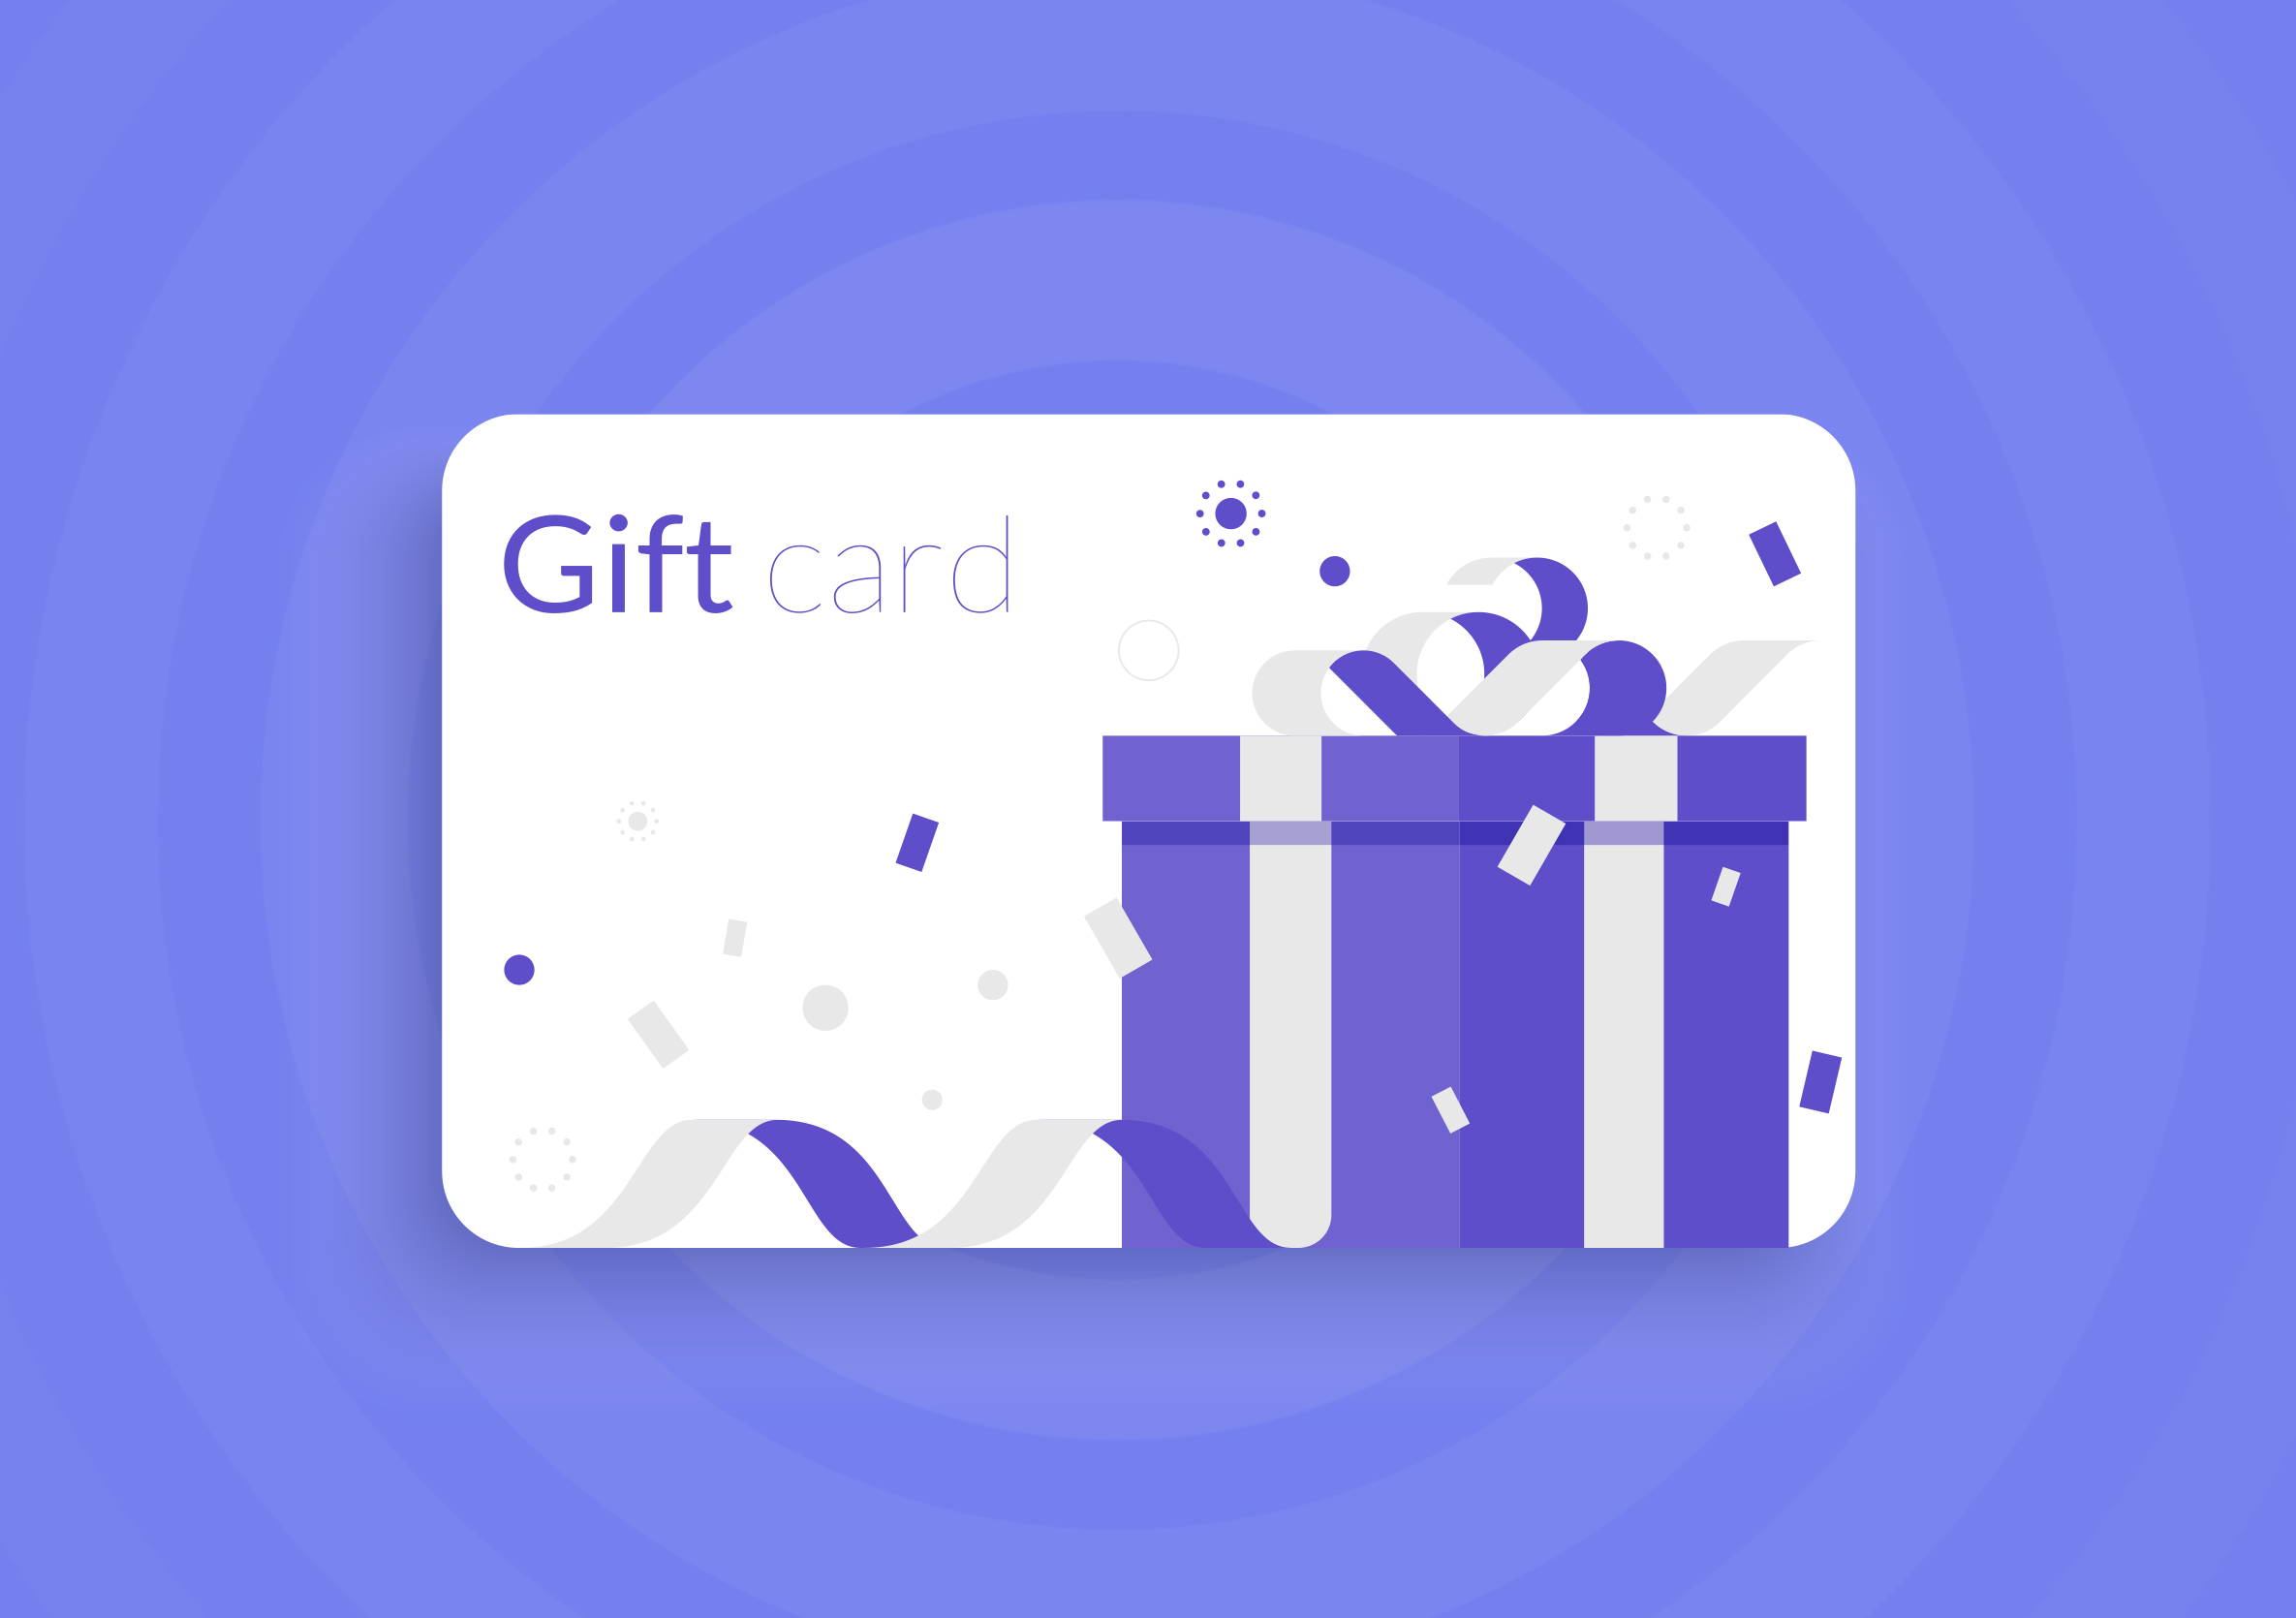 Discover 137+ disadvantages of gift cards latest